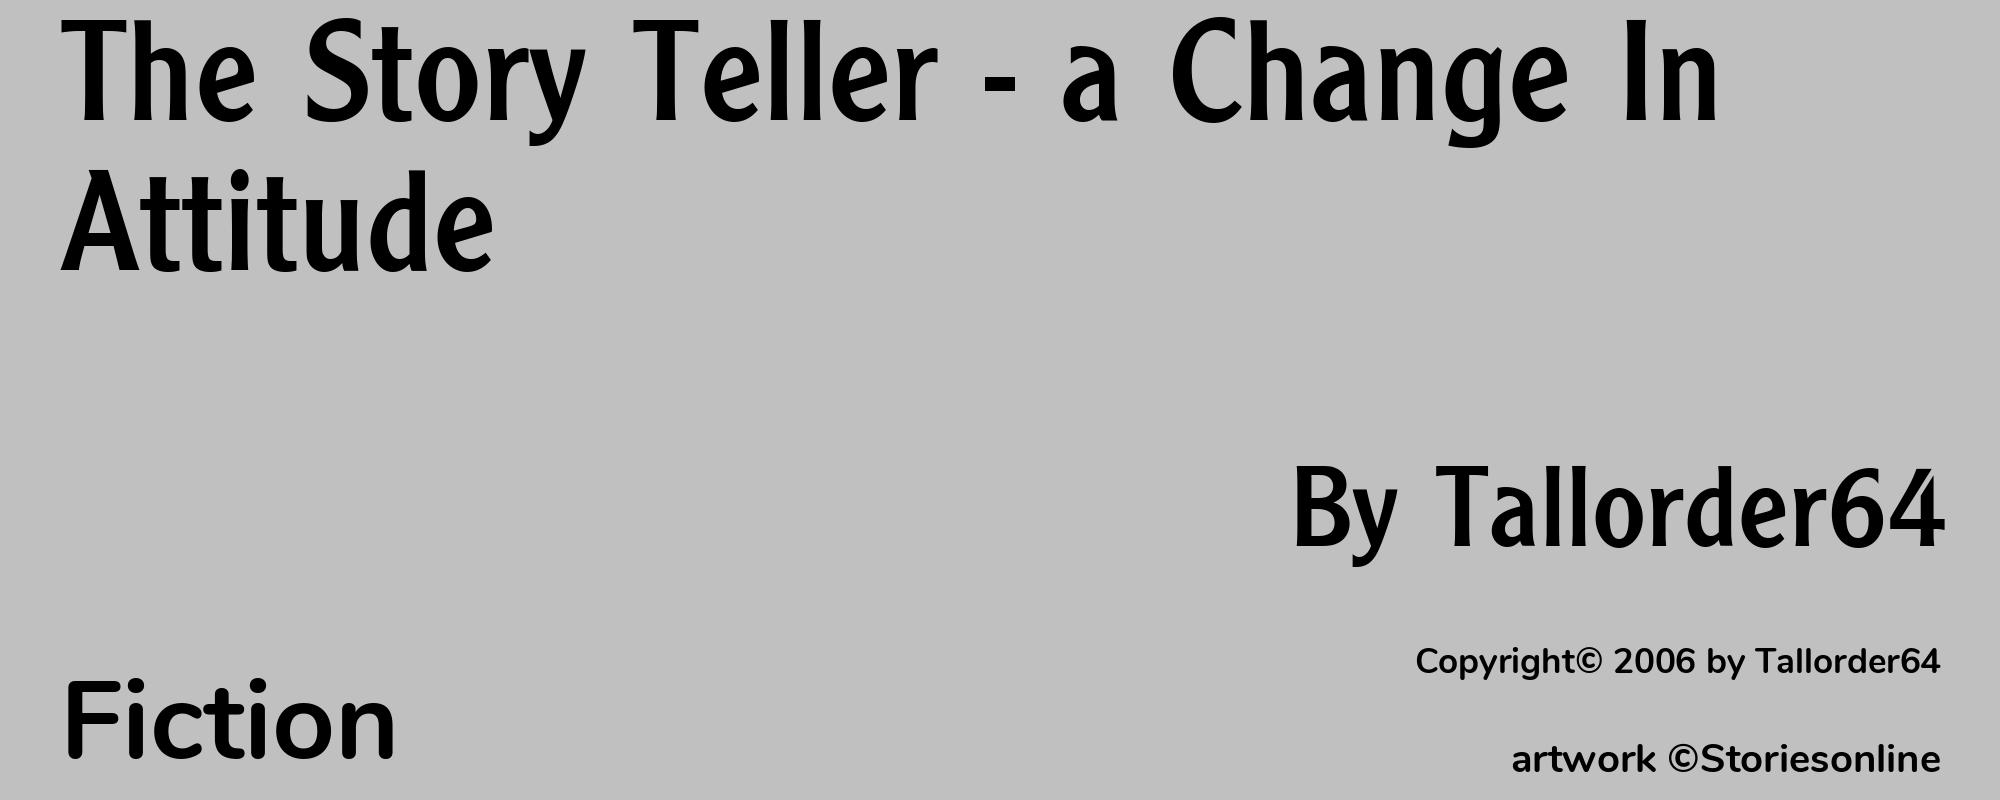 The Story Teller - a Change In Attitude - Cover